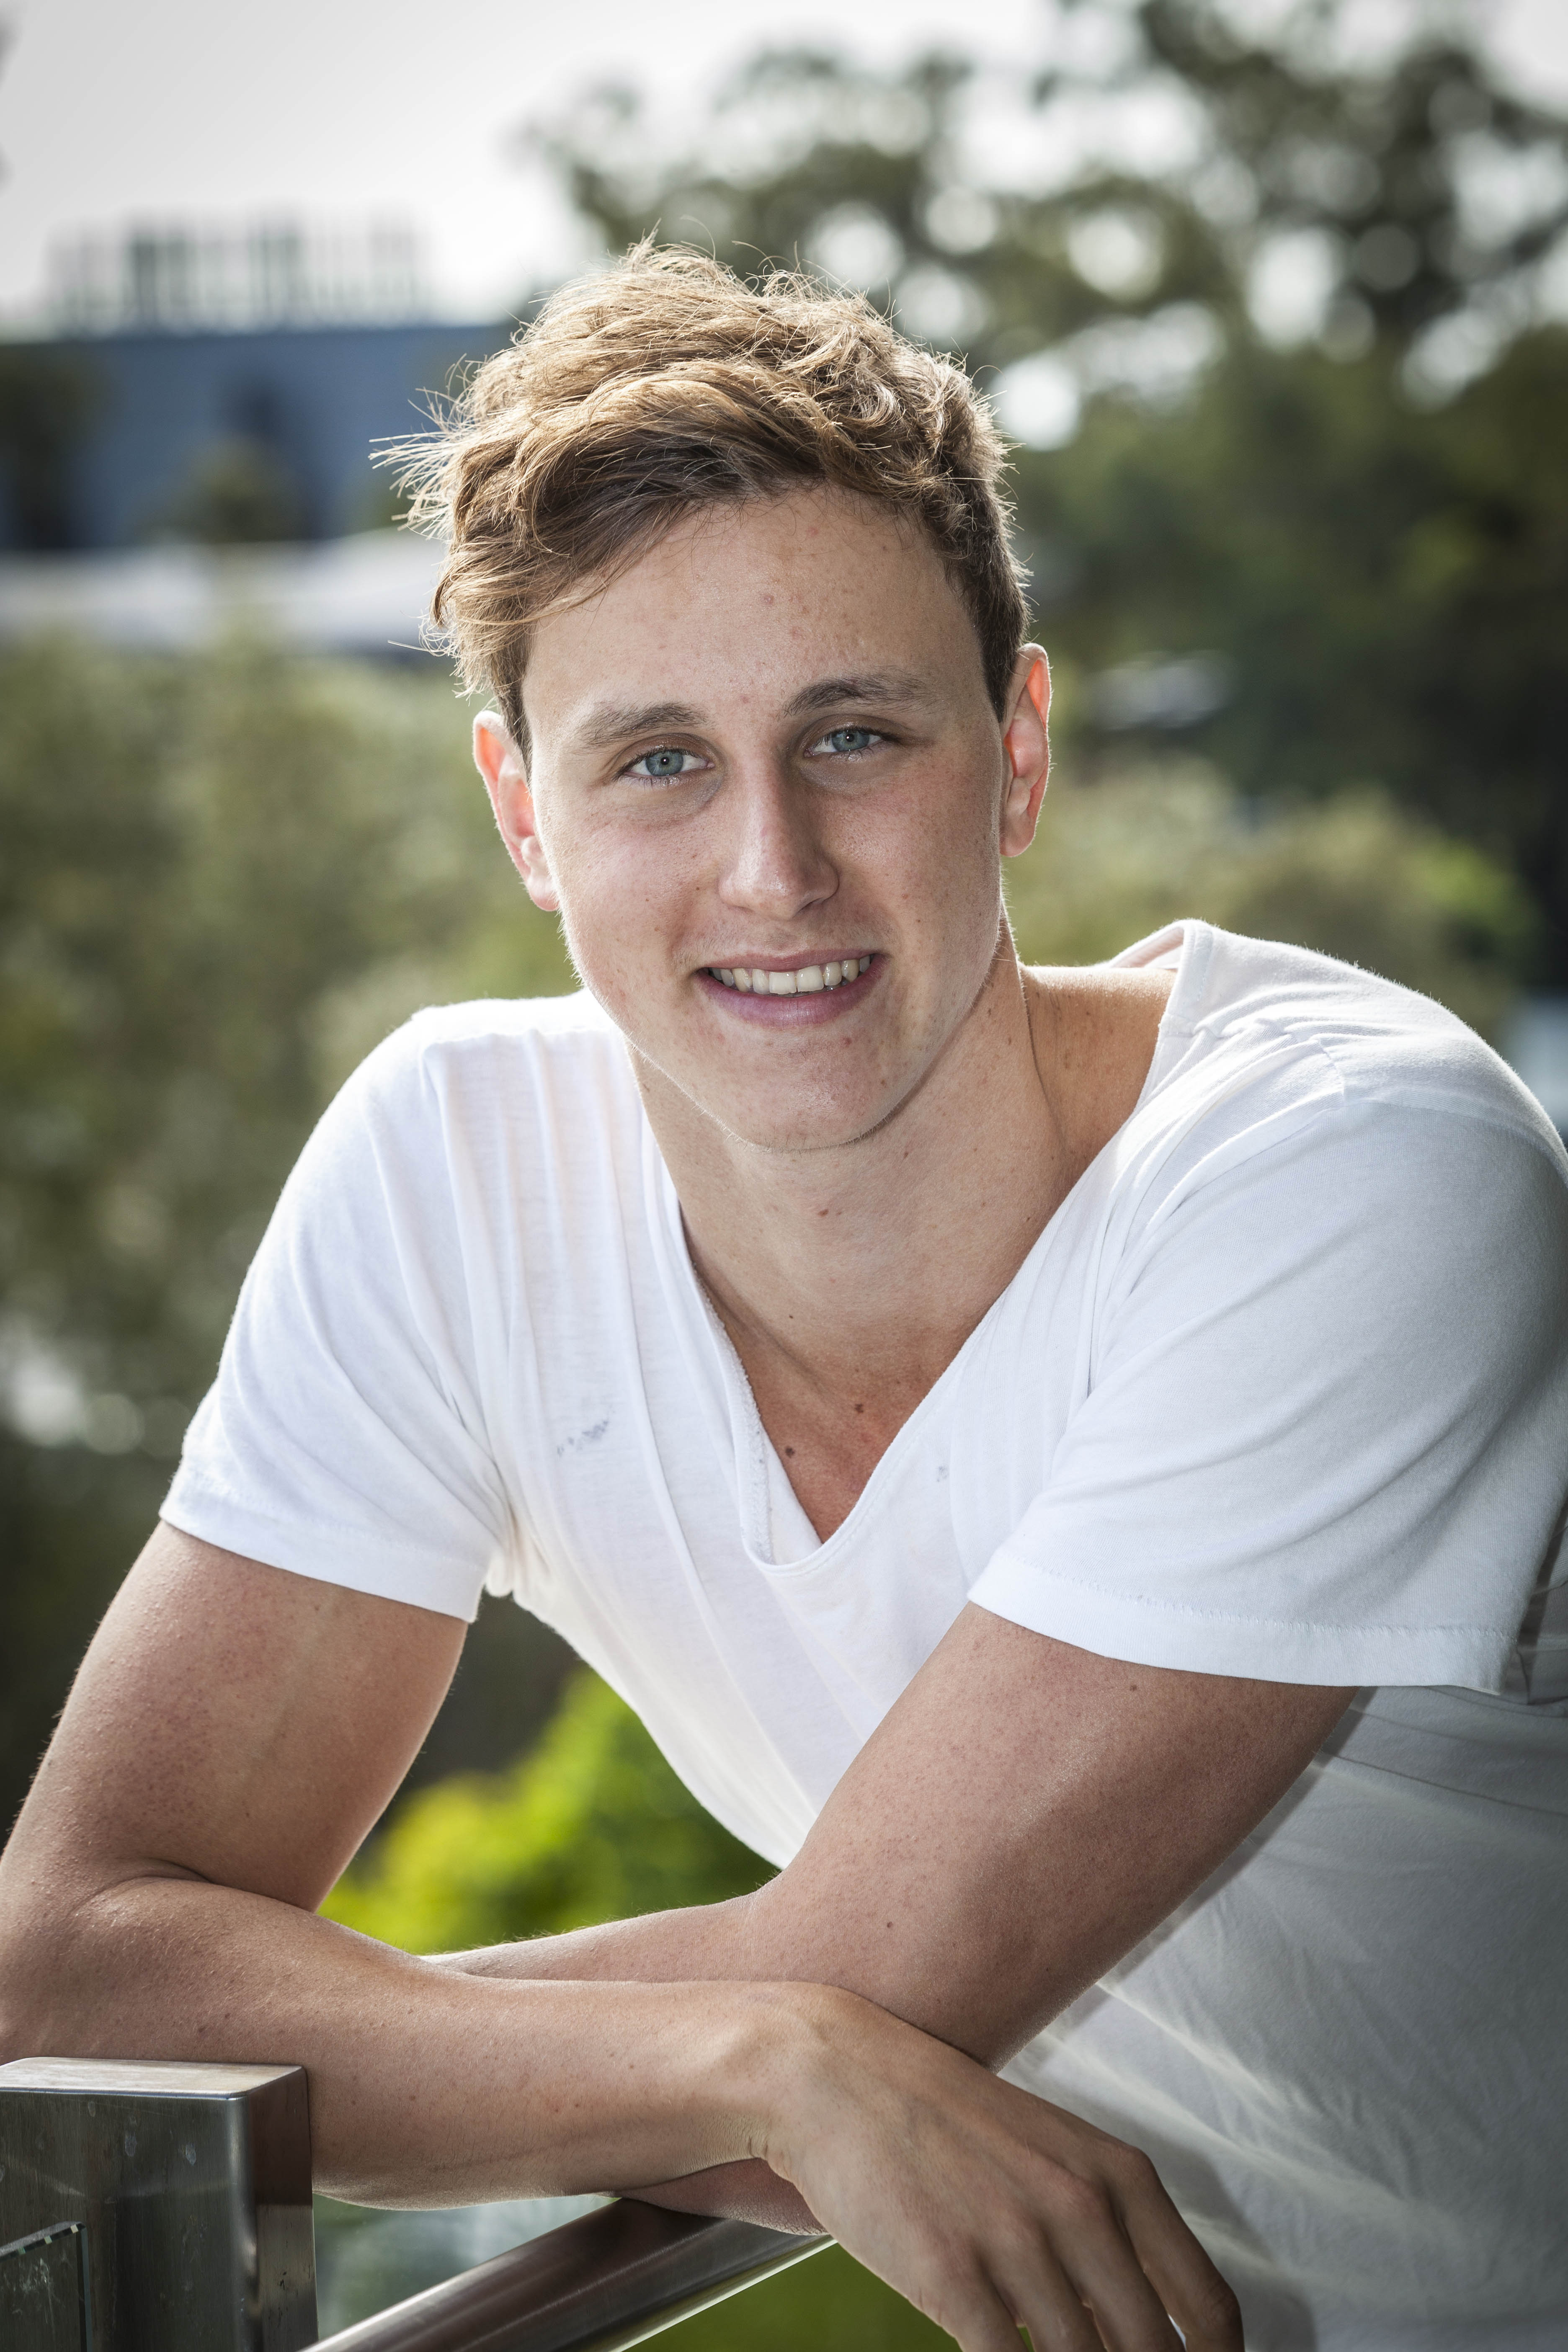 Cam McEvoy who will be competing in the Glasgow 2014 Commonwealth Games